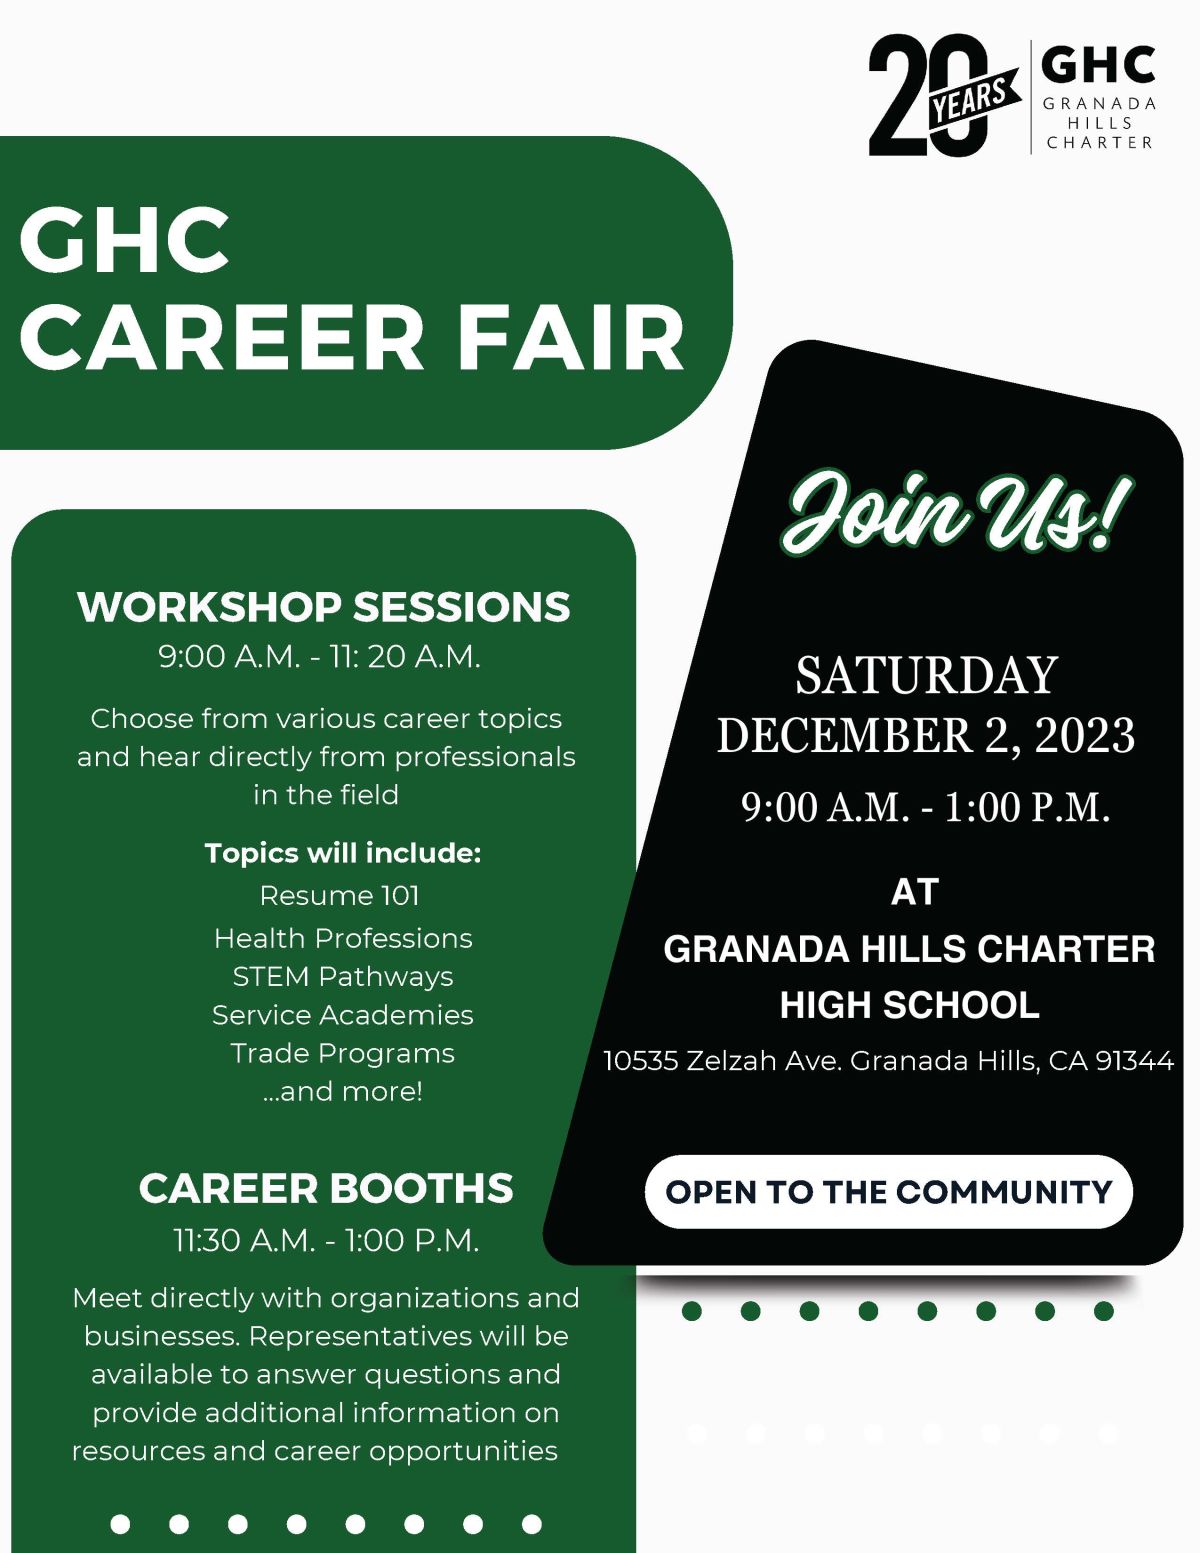 Open to the Public! GHC Career Fair on Saturday, December 2 Details